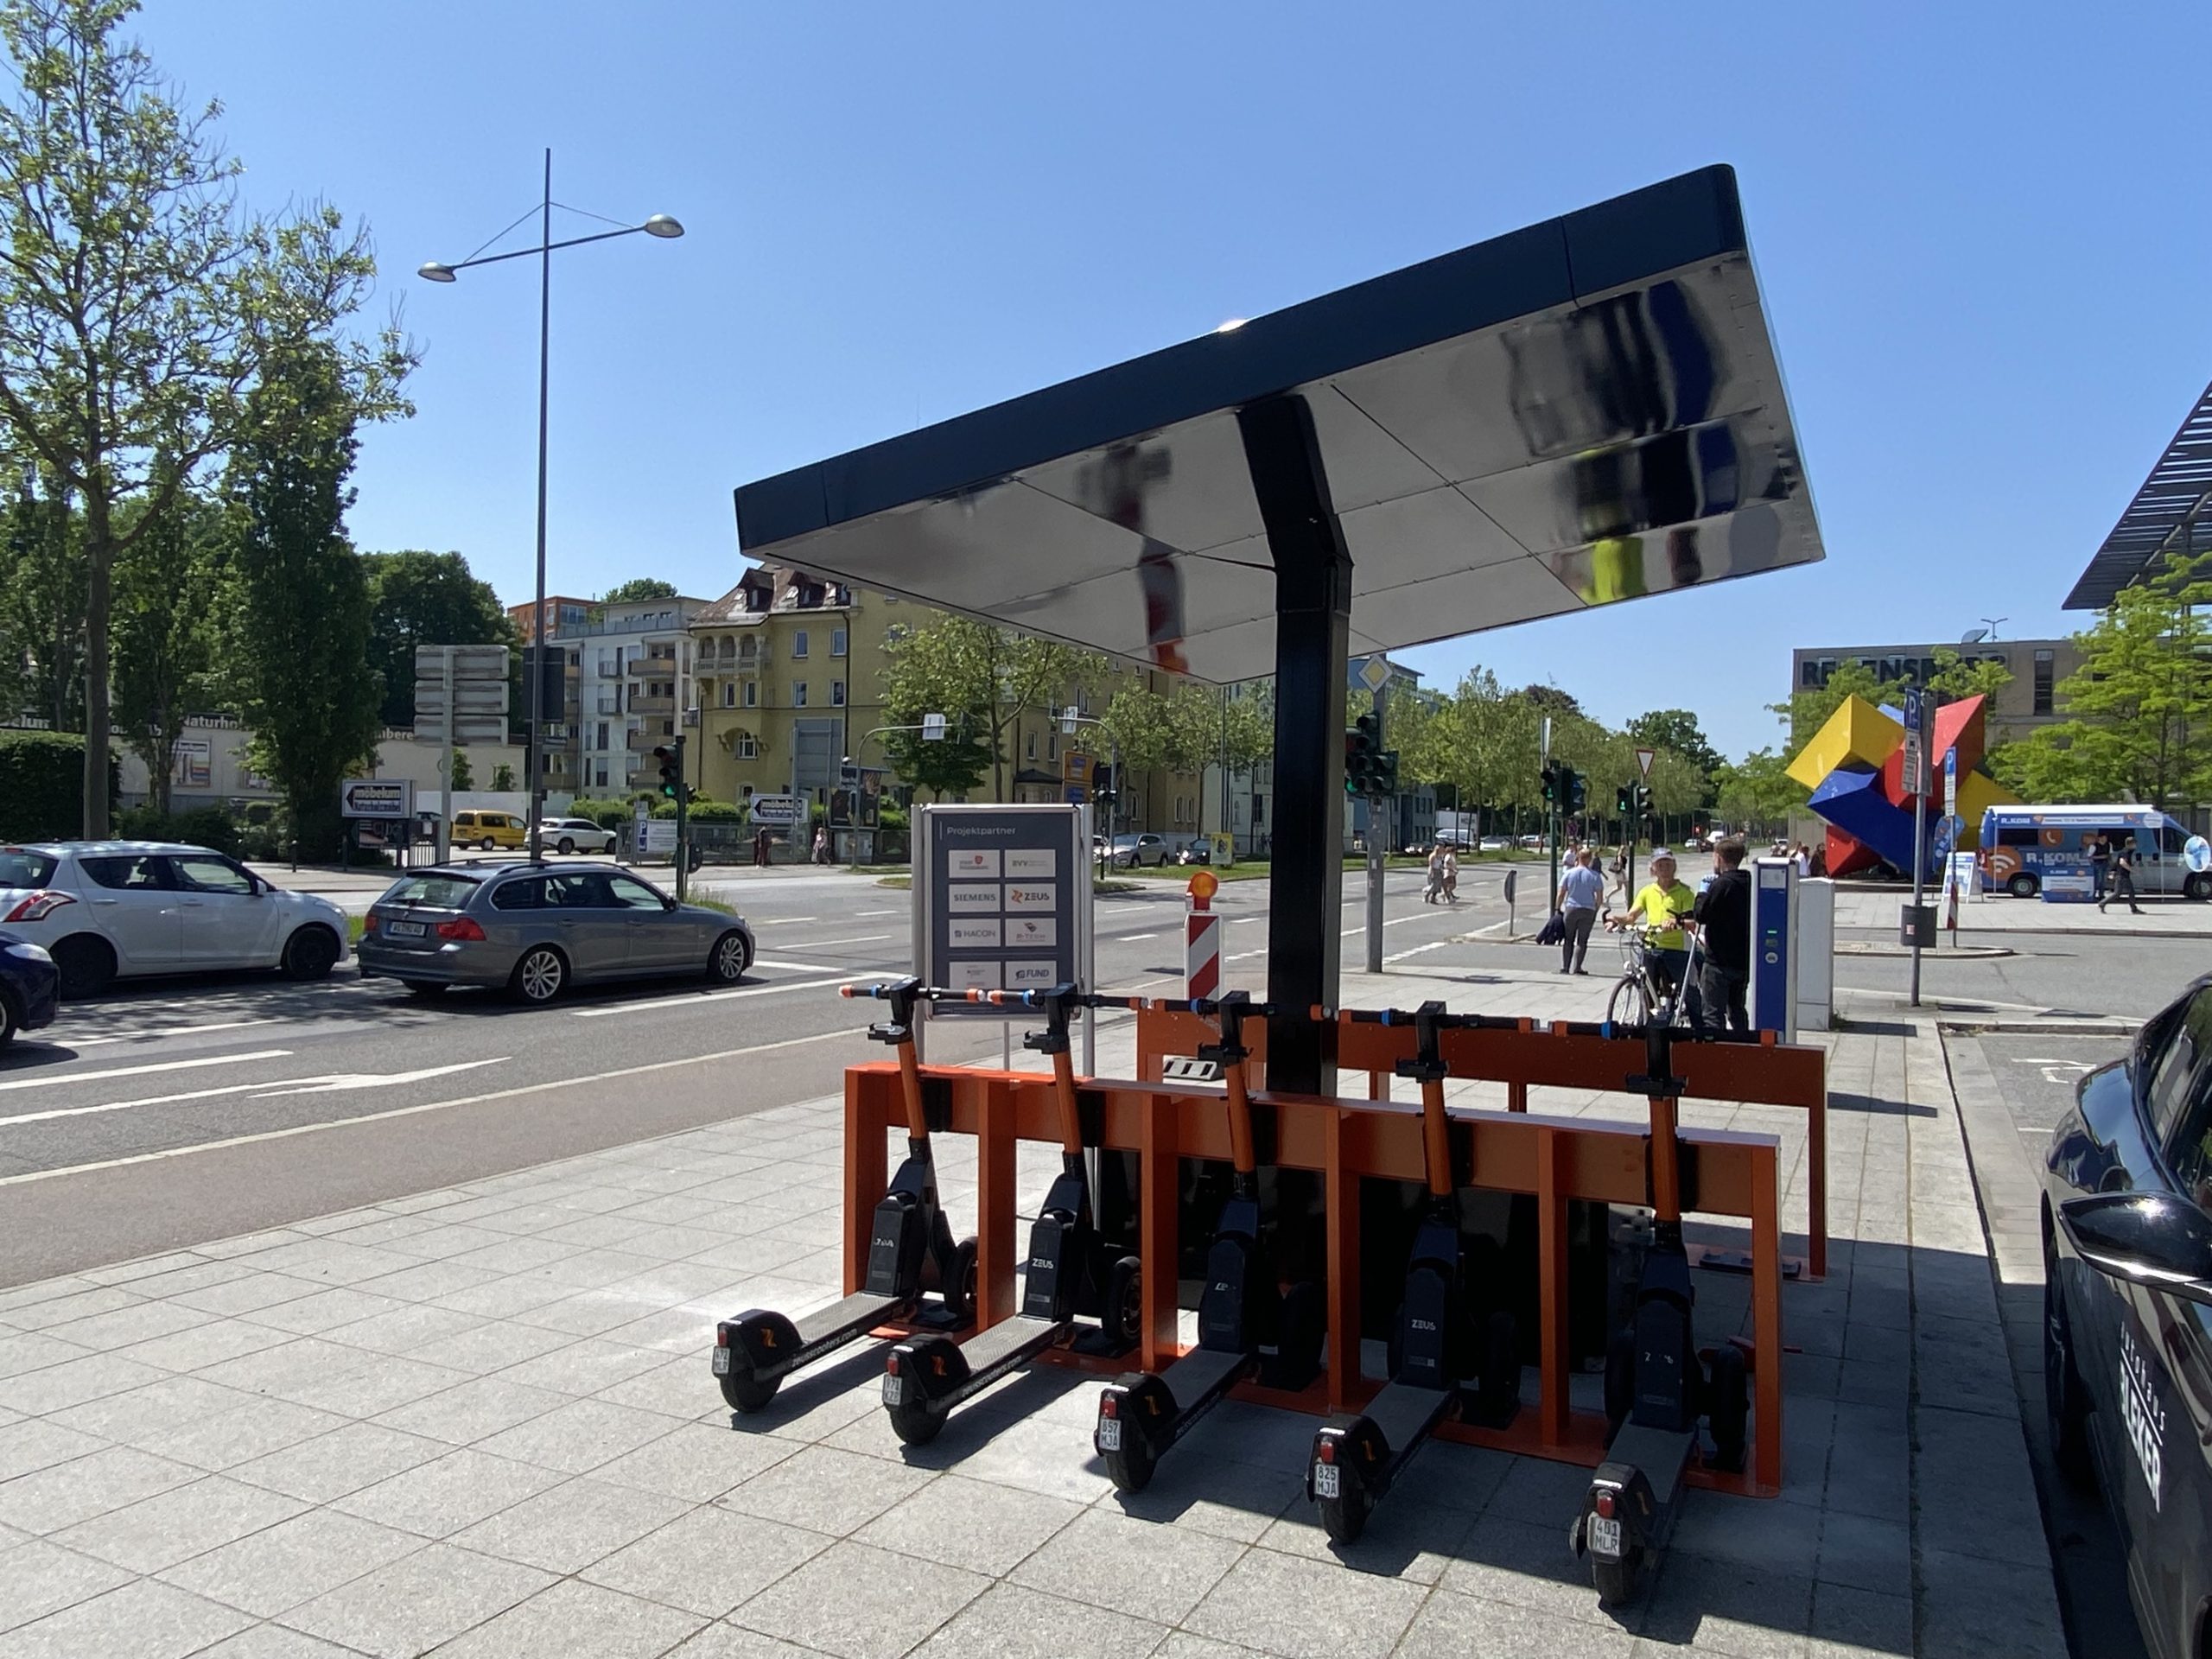 Zeus introduces solar e-scooter charging stations in Germany